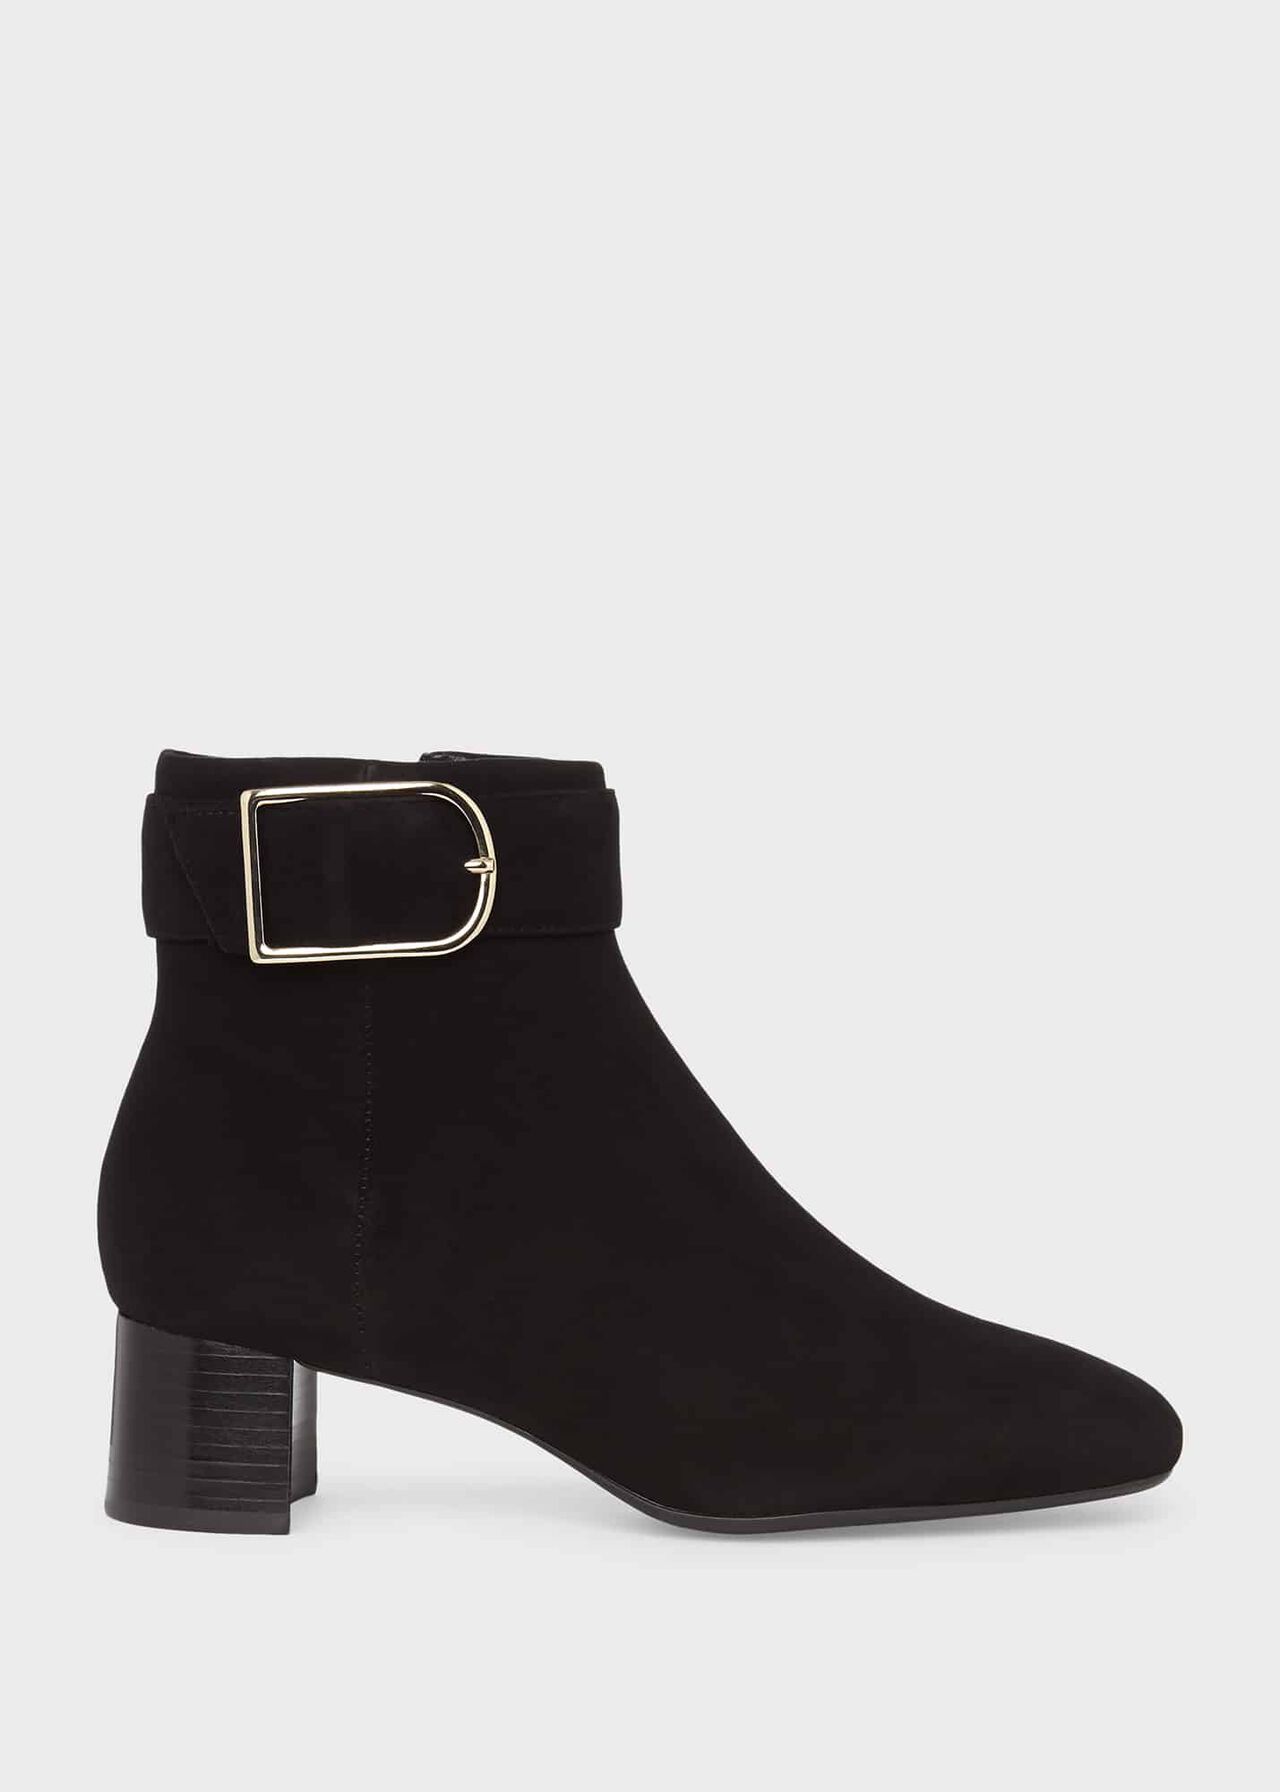 Suzannah Ankle Boots, Black, hi-res